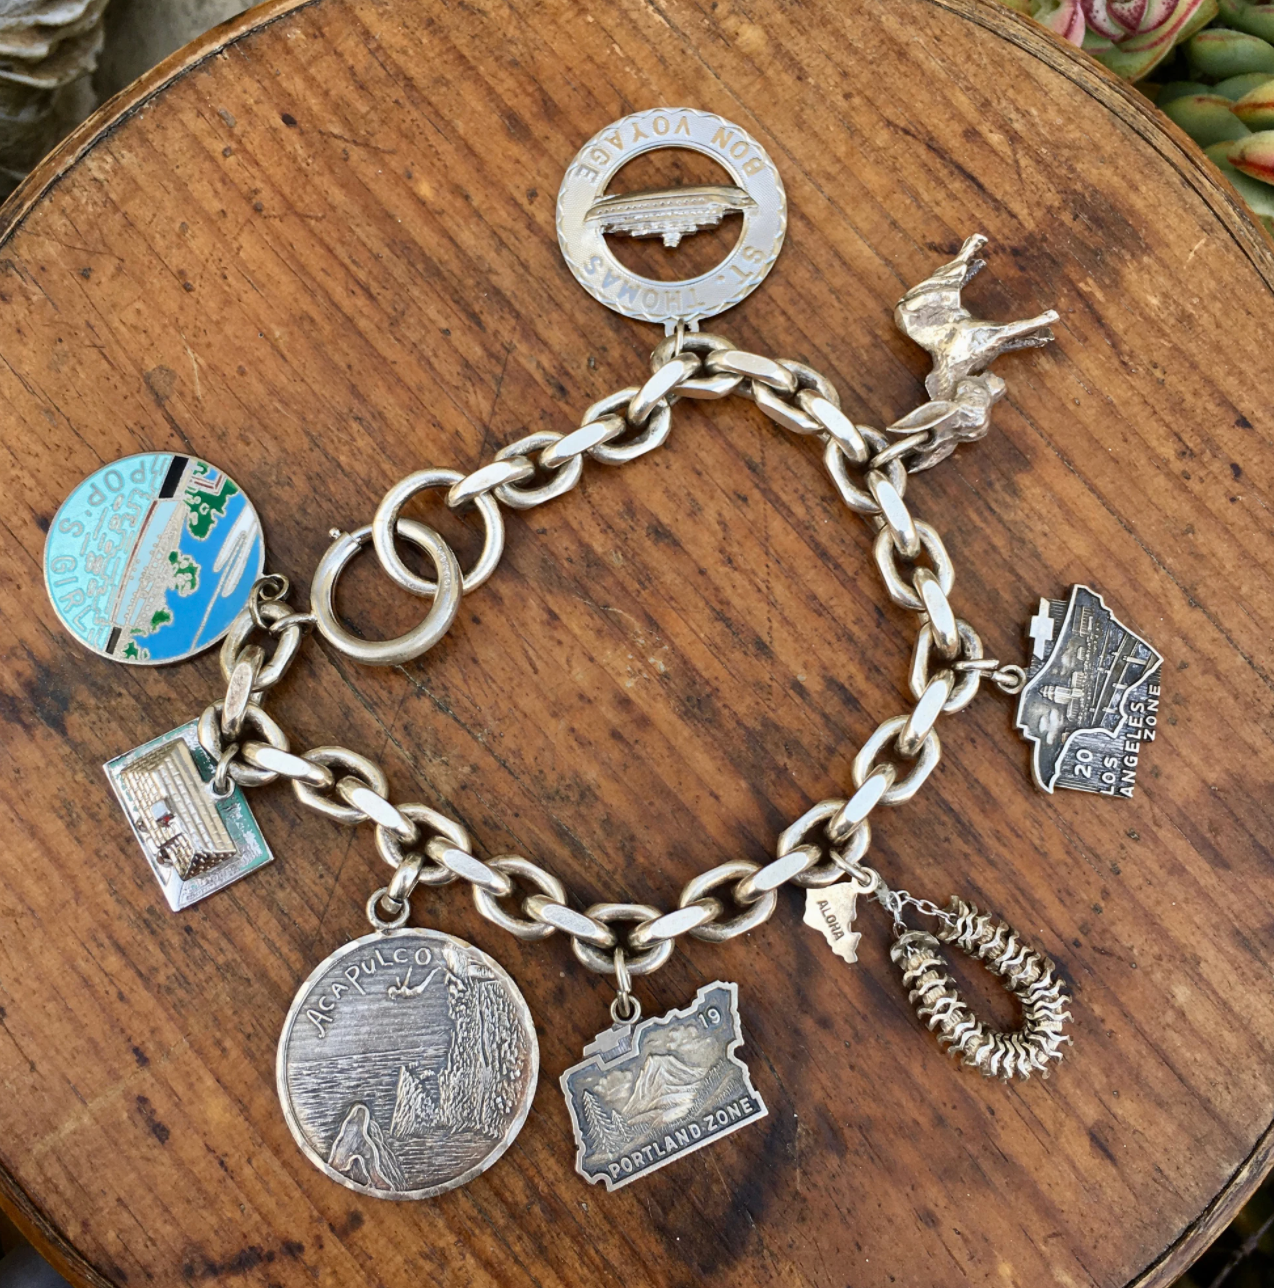 Vintage Sterling Silver Charm Bracelet with Over-Sized Charms